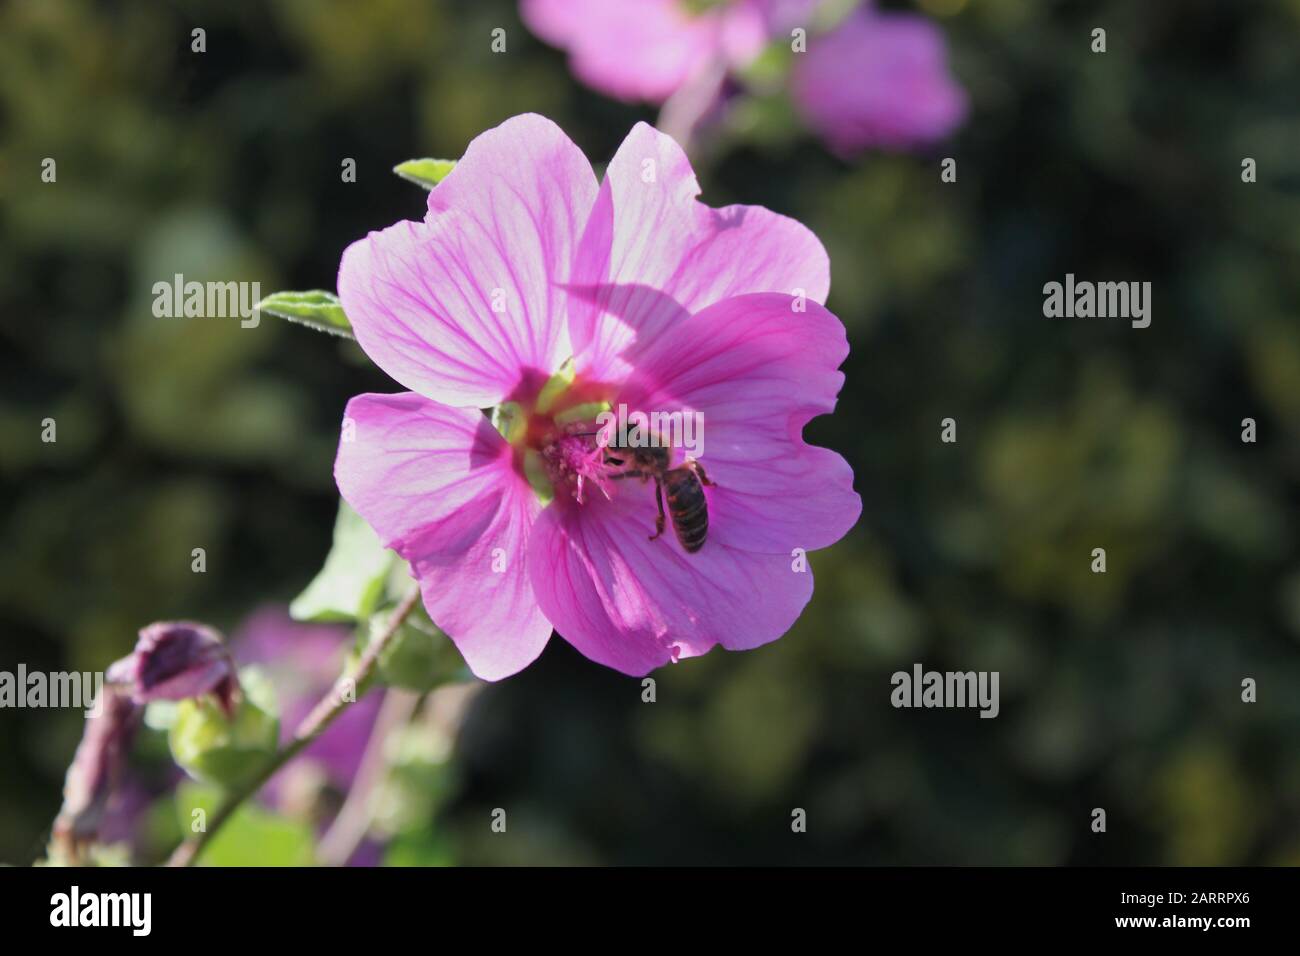 Lavatera x clementii 'Rosea' tree mallow bright pink flower with bee collecting pollen Stock Photo